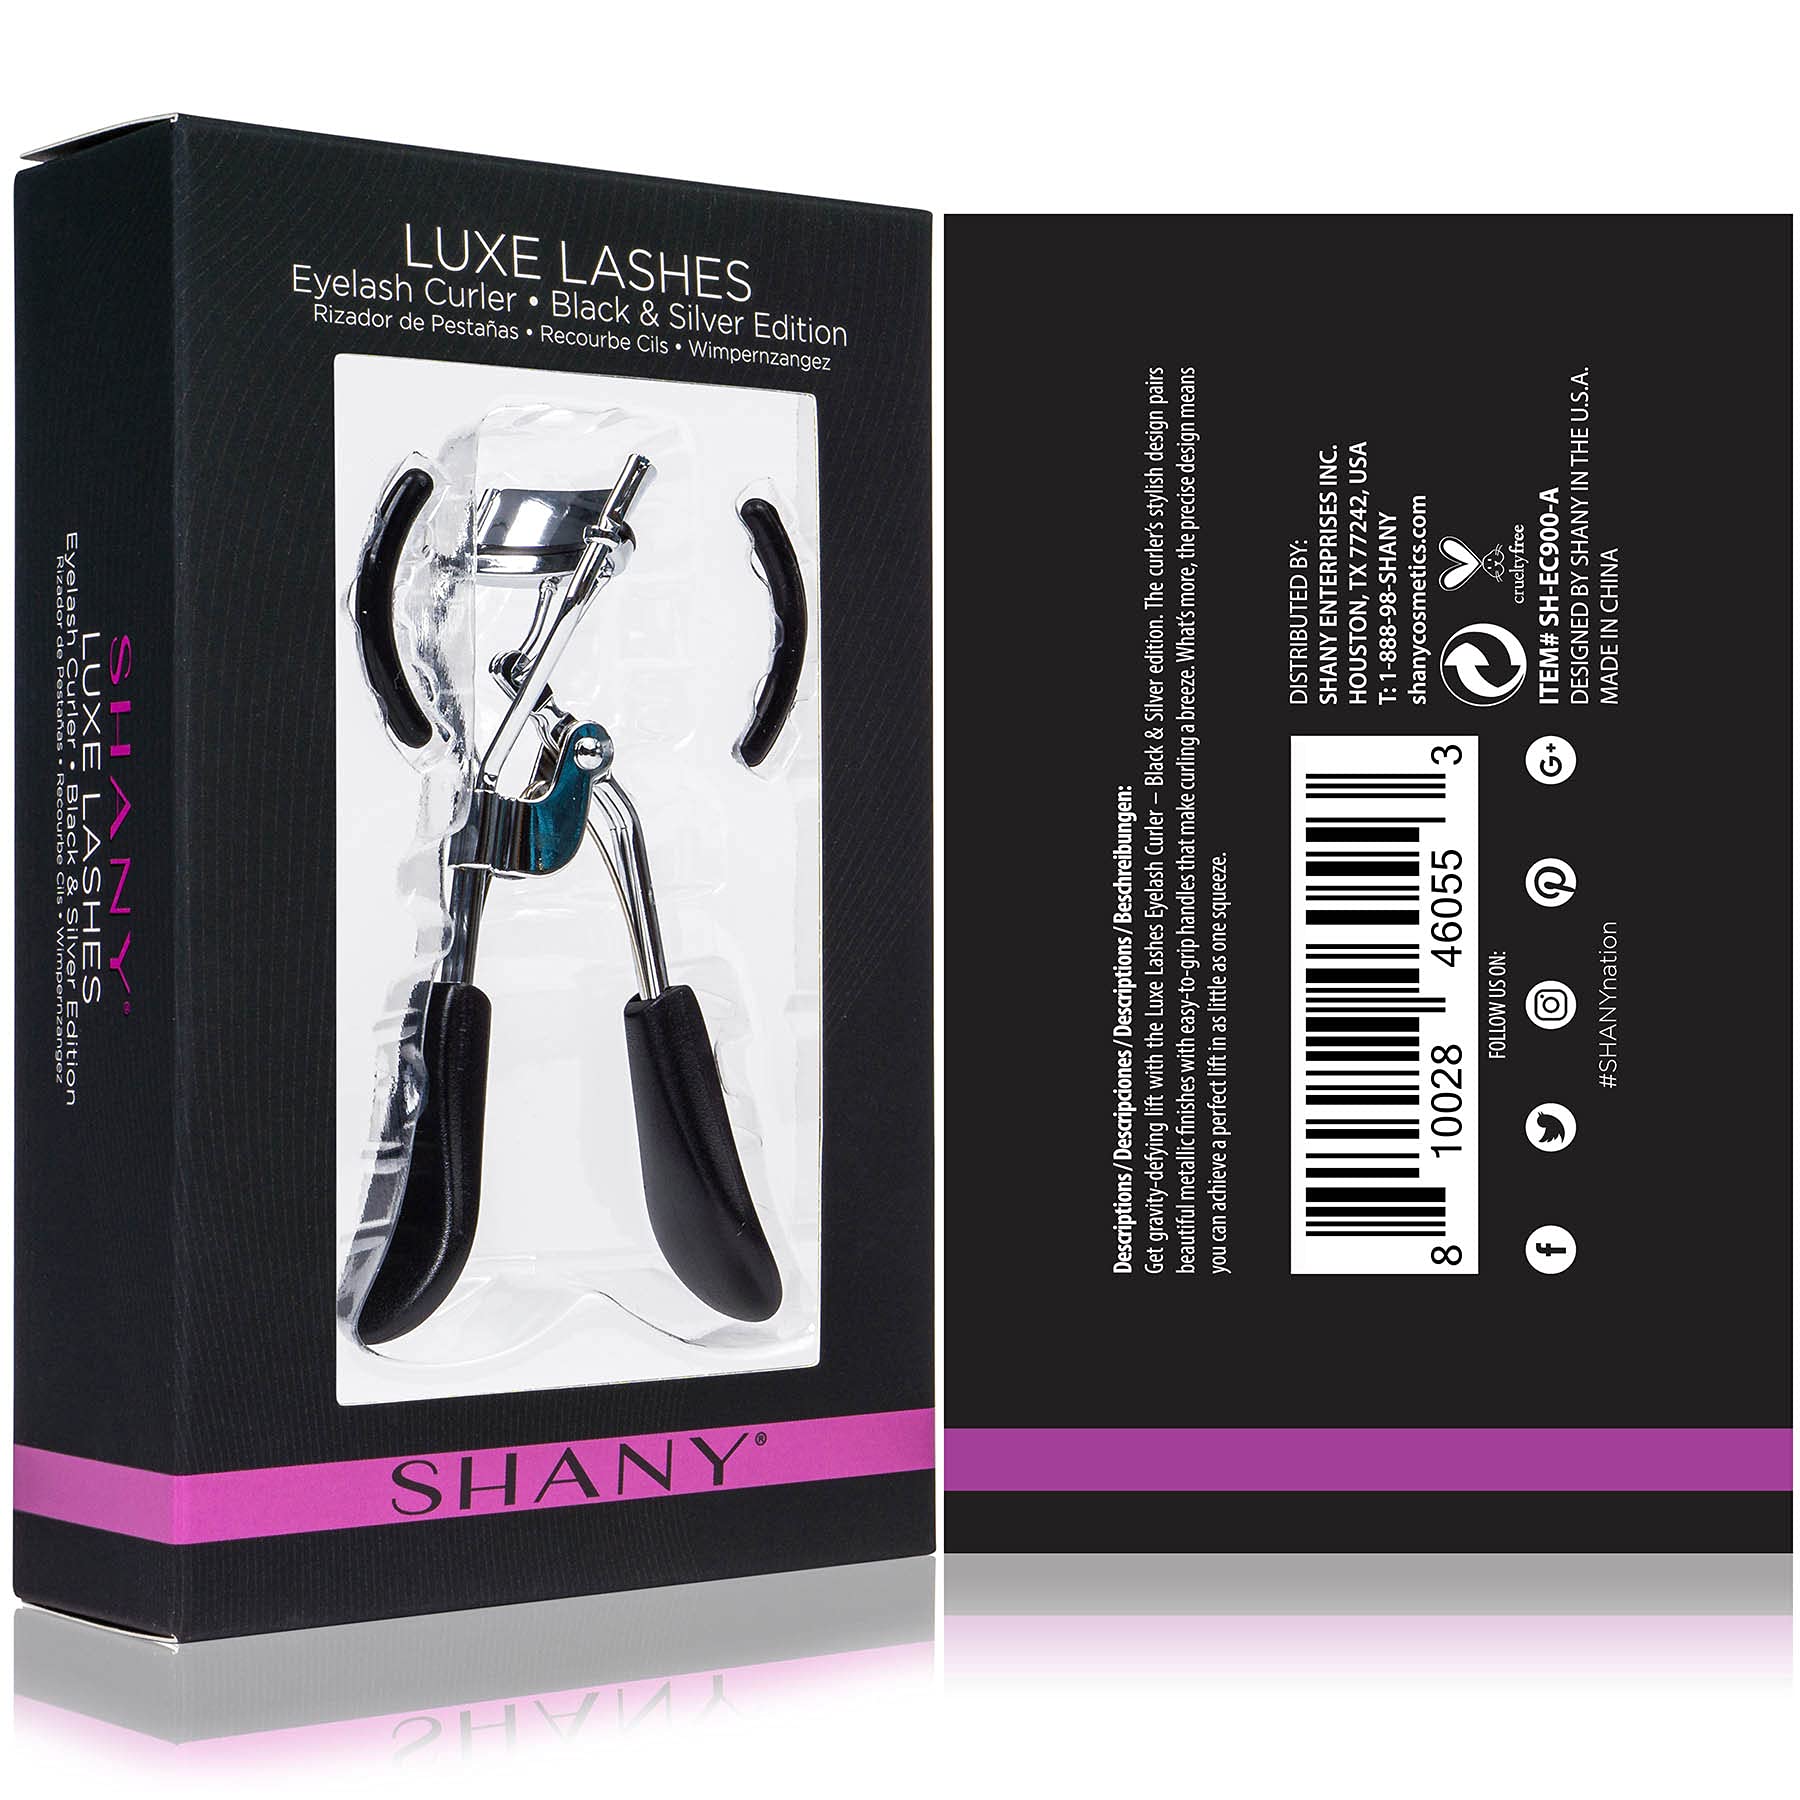 SHANY Luxe Lashes Eyelash Curler - Professional Makeup Tool for Eyelashes with Two Silicone Refill/Replacement Pads - Black and Silver